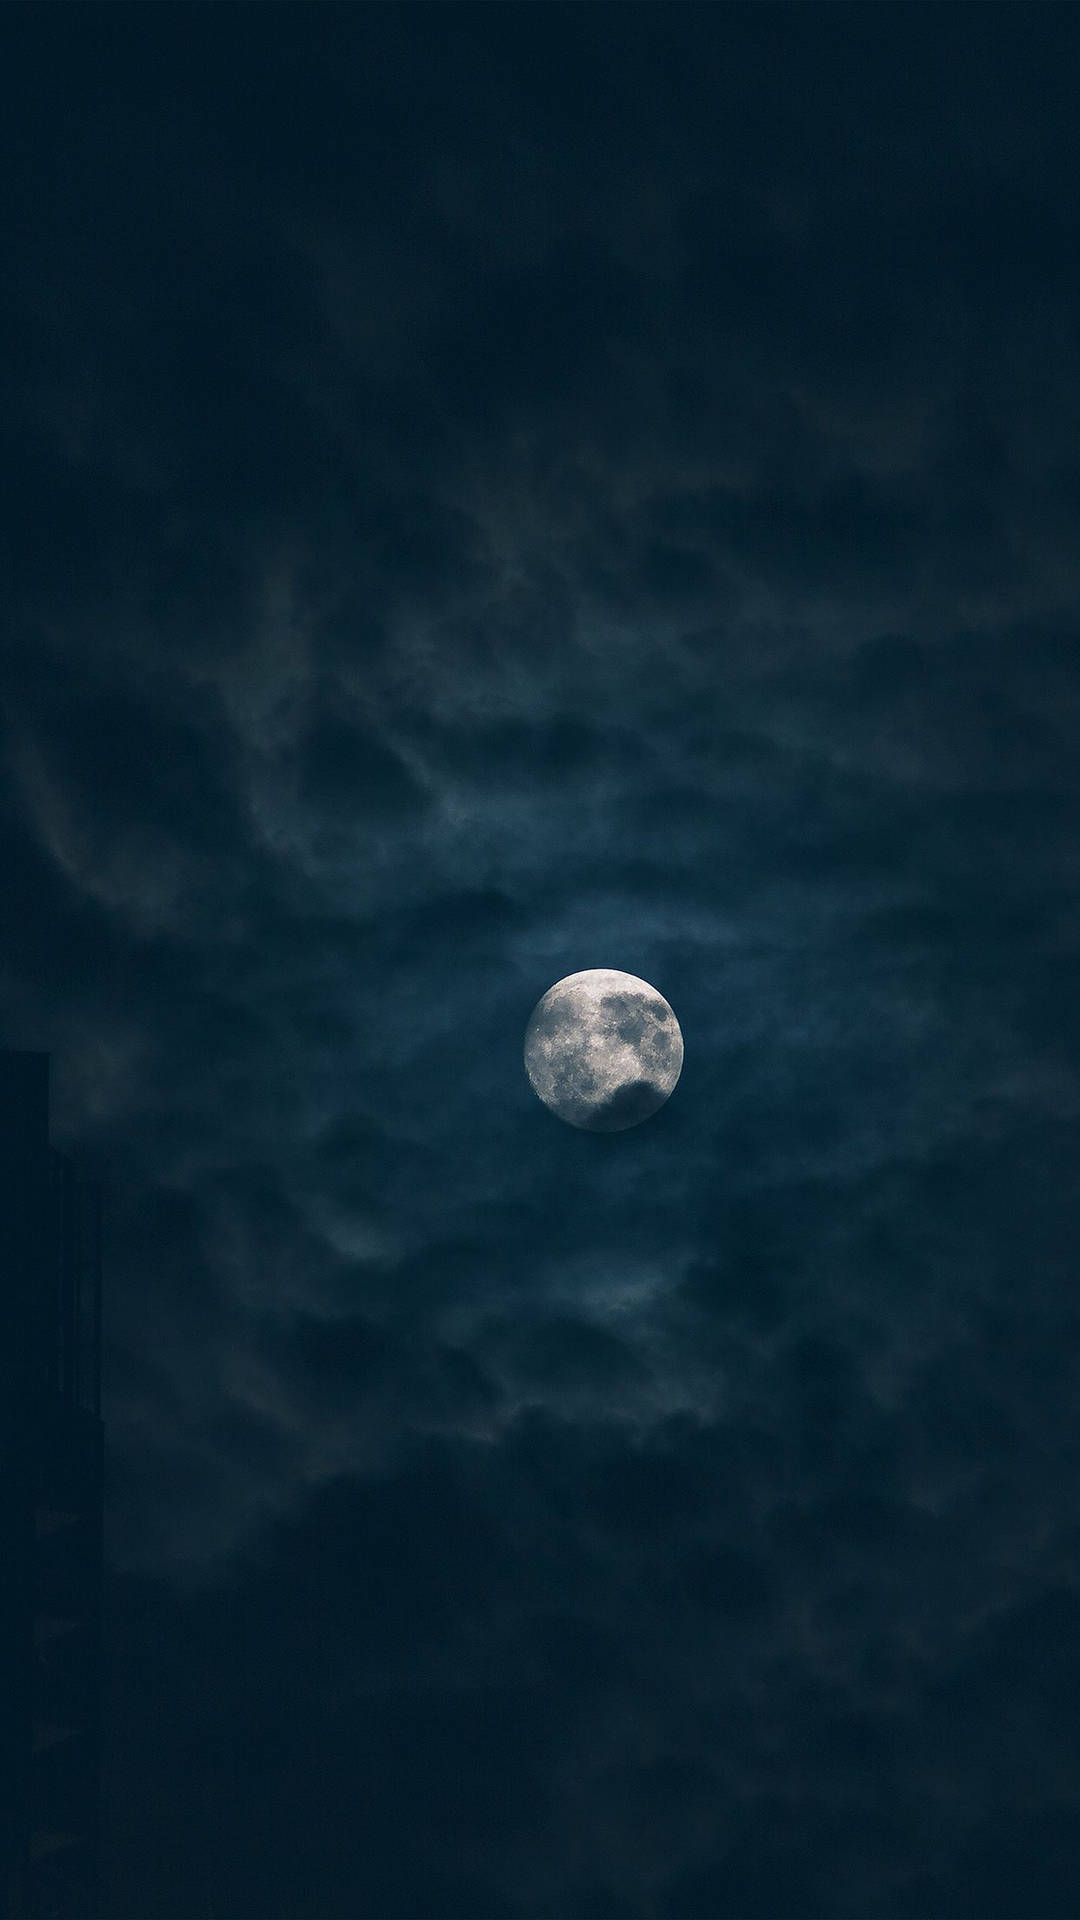 Dark Night Moon Covered In Clouds